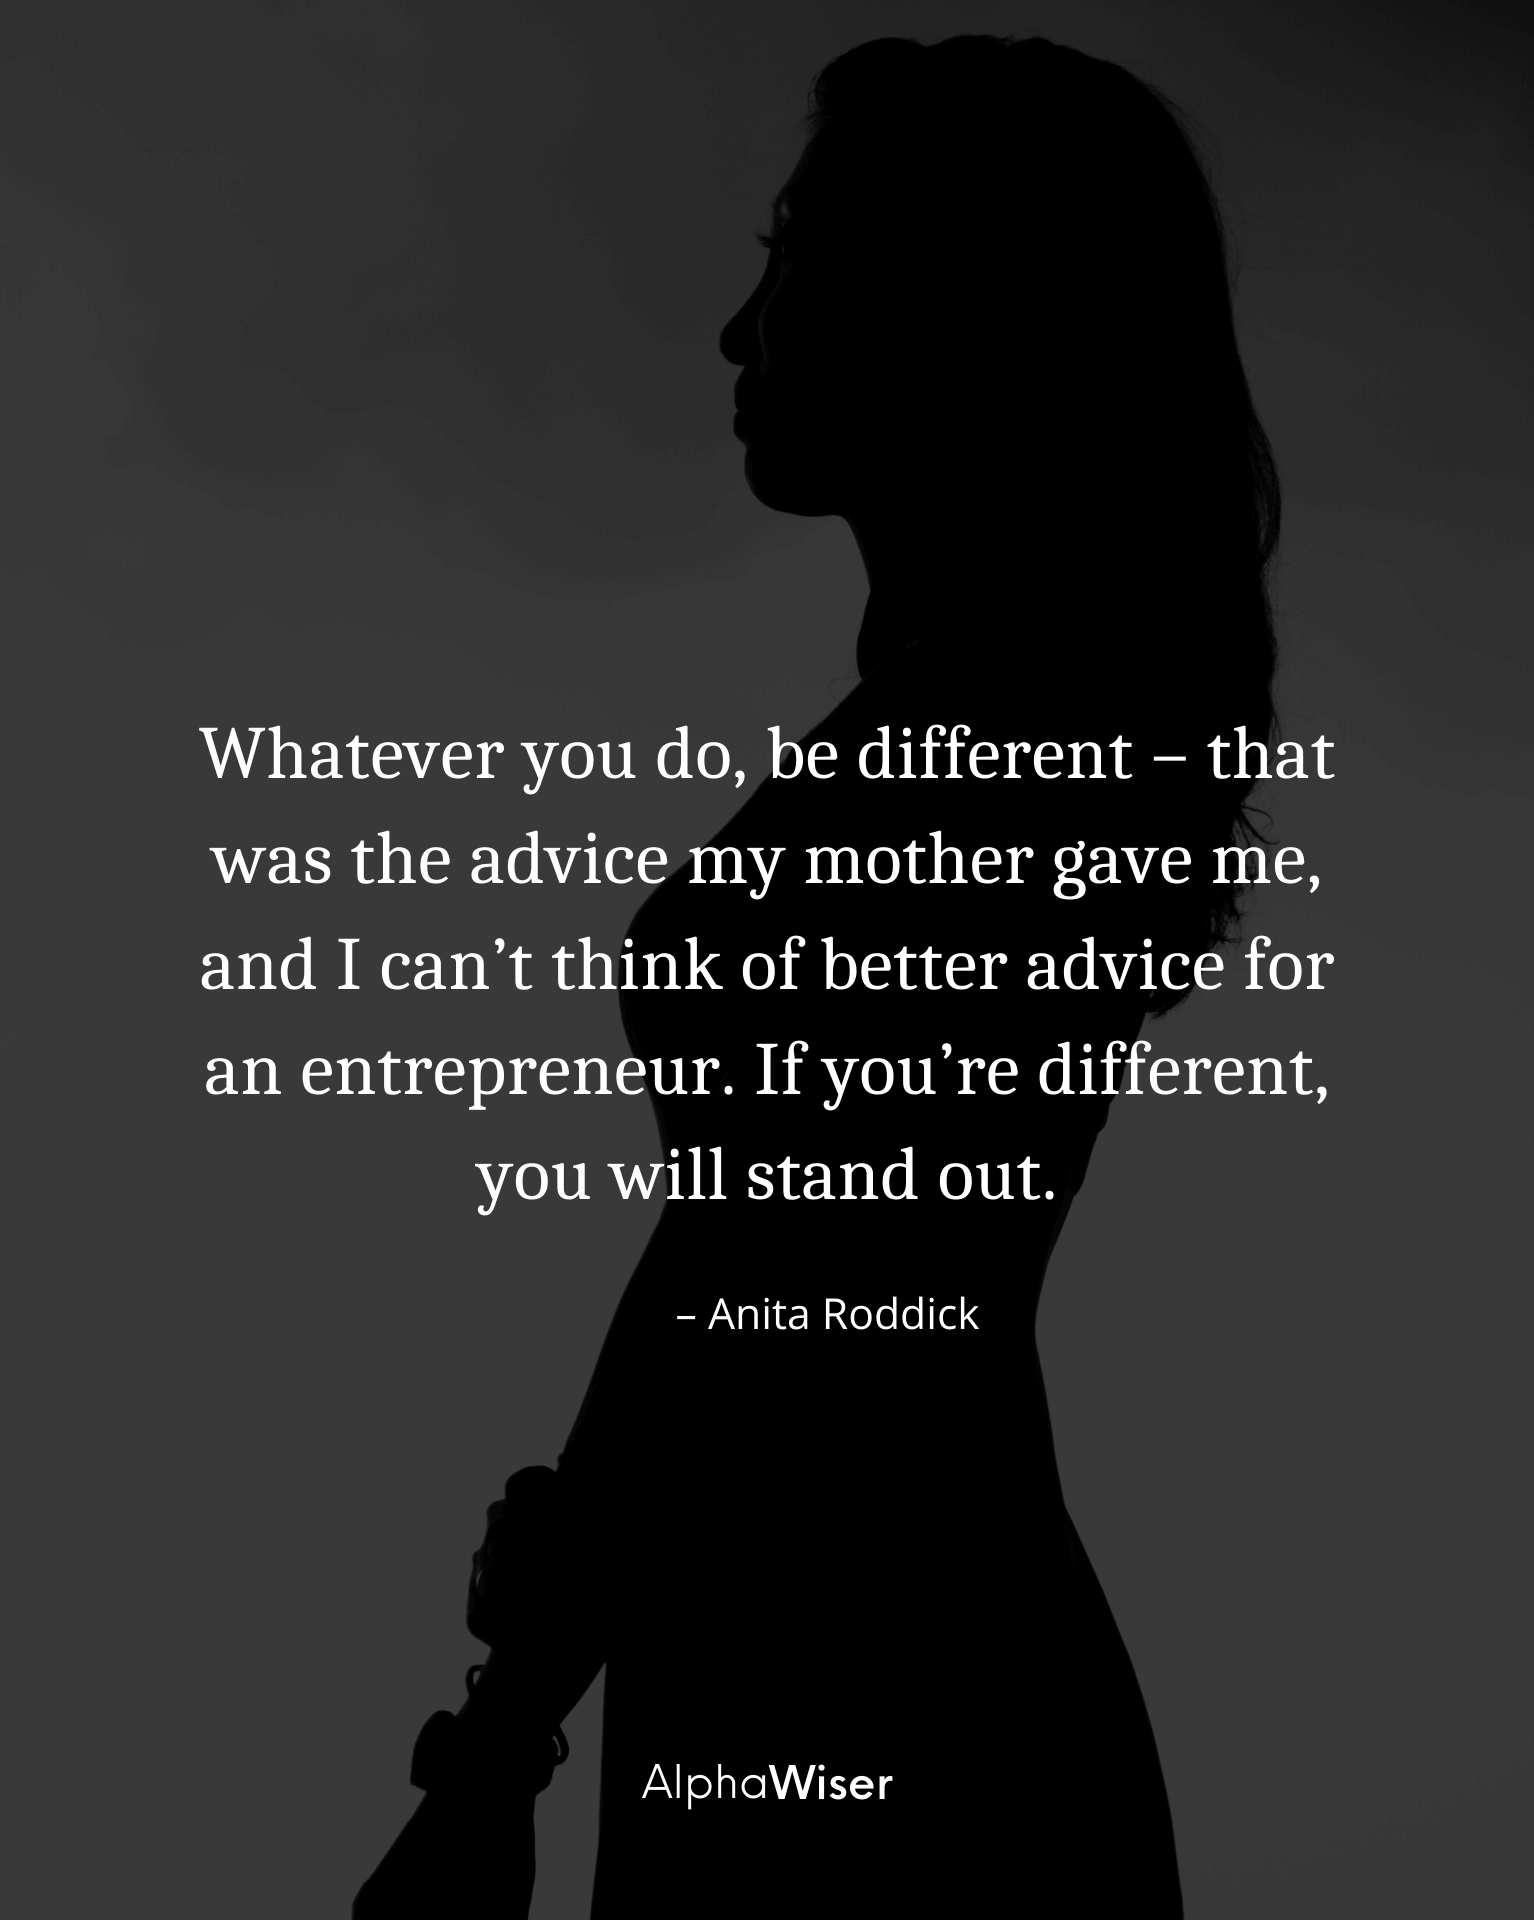 Whatever you do, be different – that was the advice my mother gave me